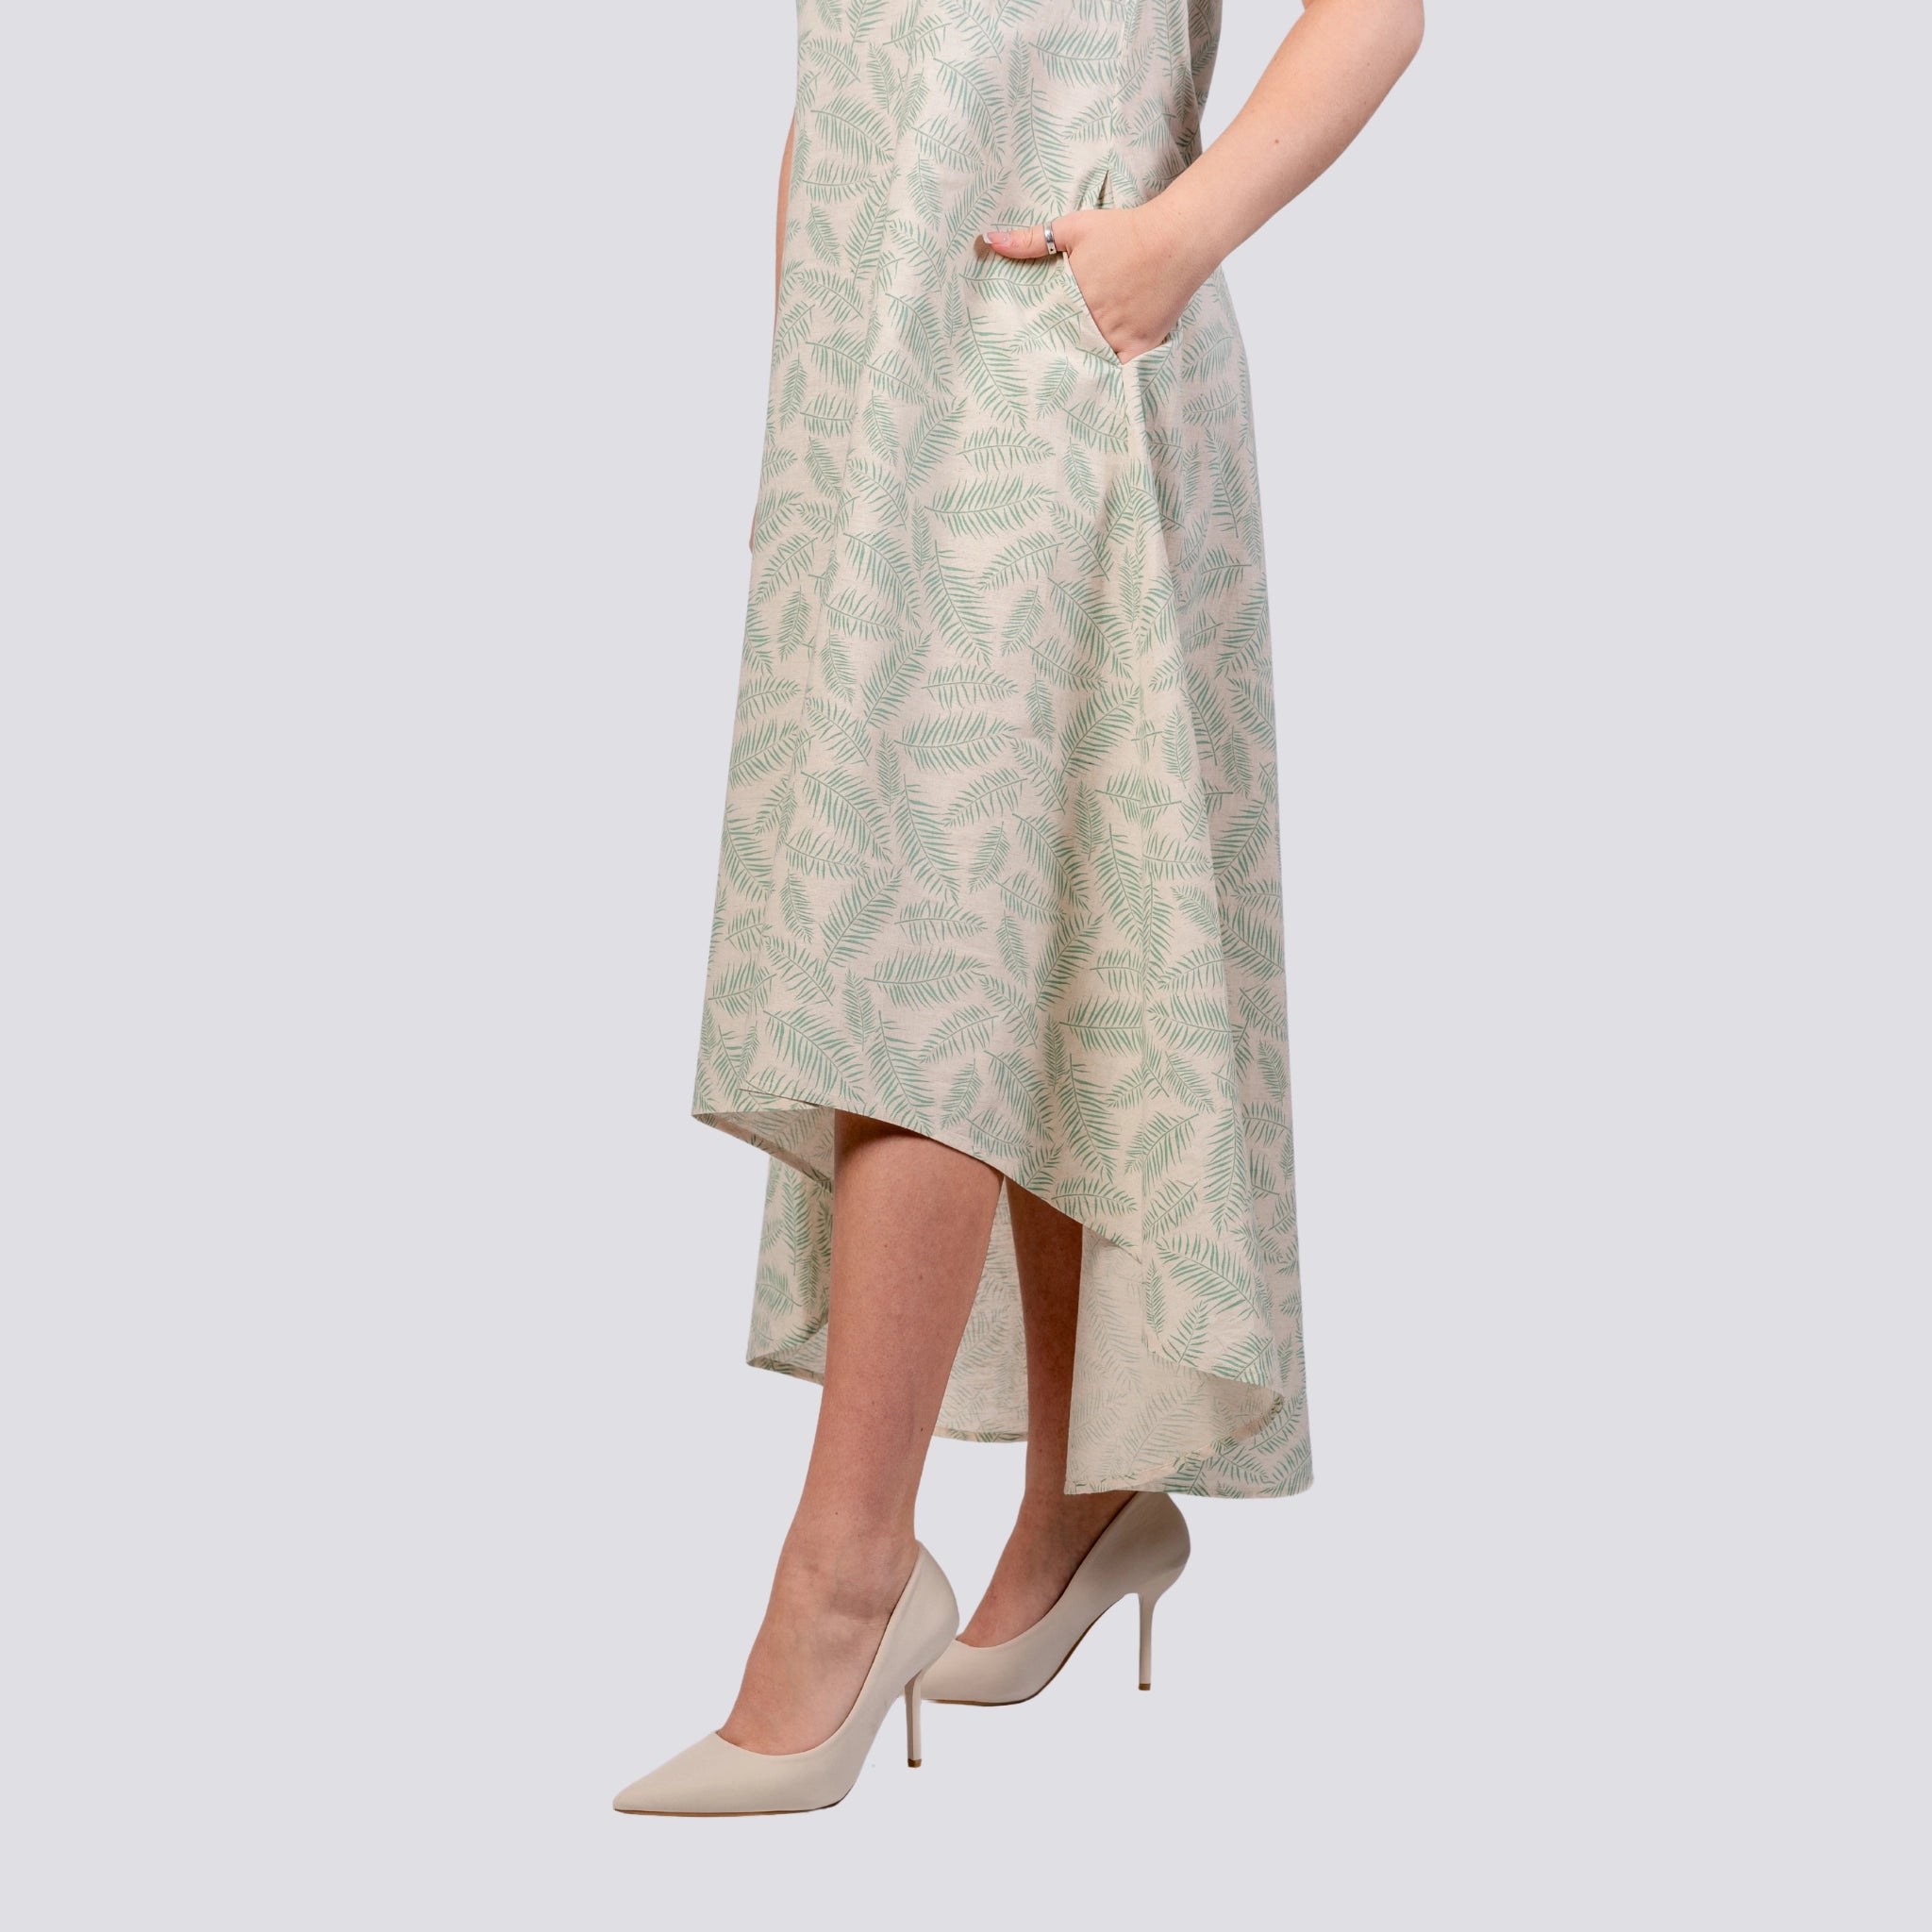 Woman in a Karee Mystic Breeze High Low Linen Cotton Midi Dress, sleeveless U-neck, and beige high heels, mid-section view on a gray background.